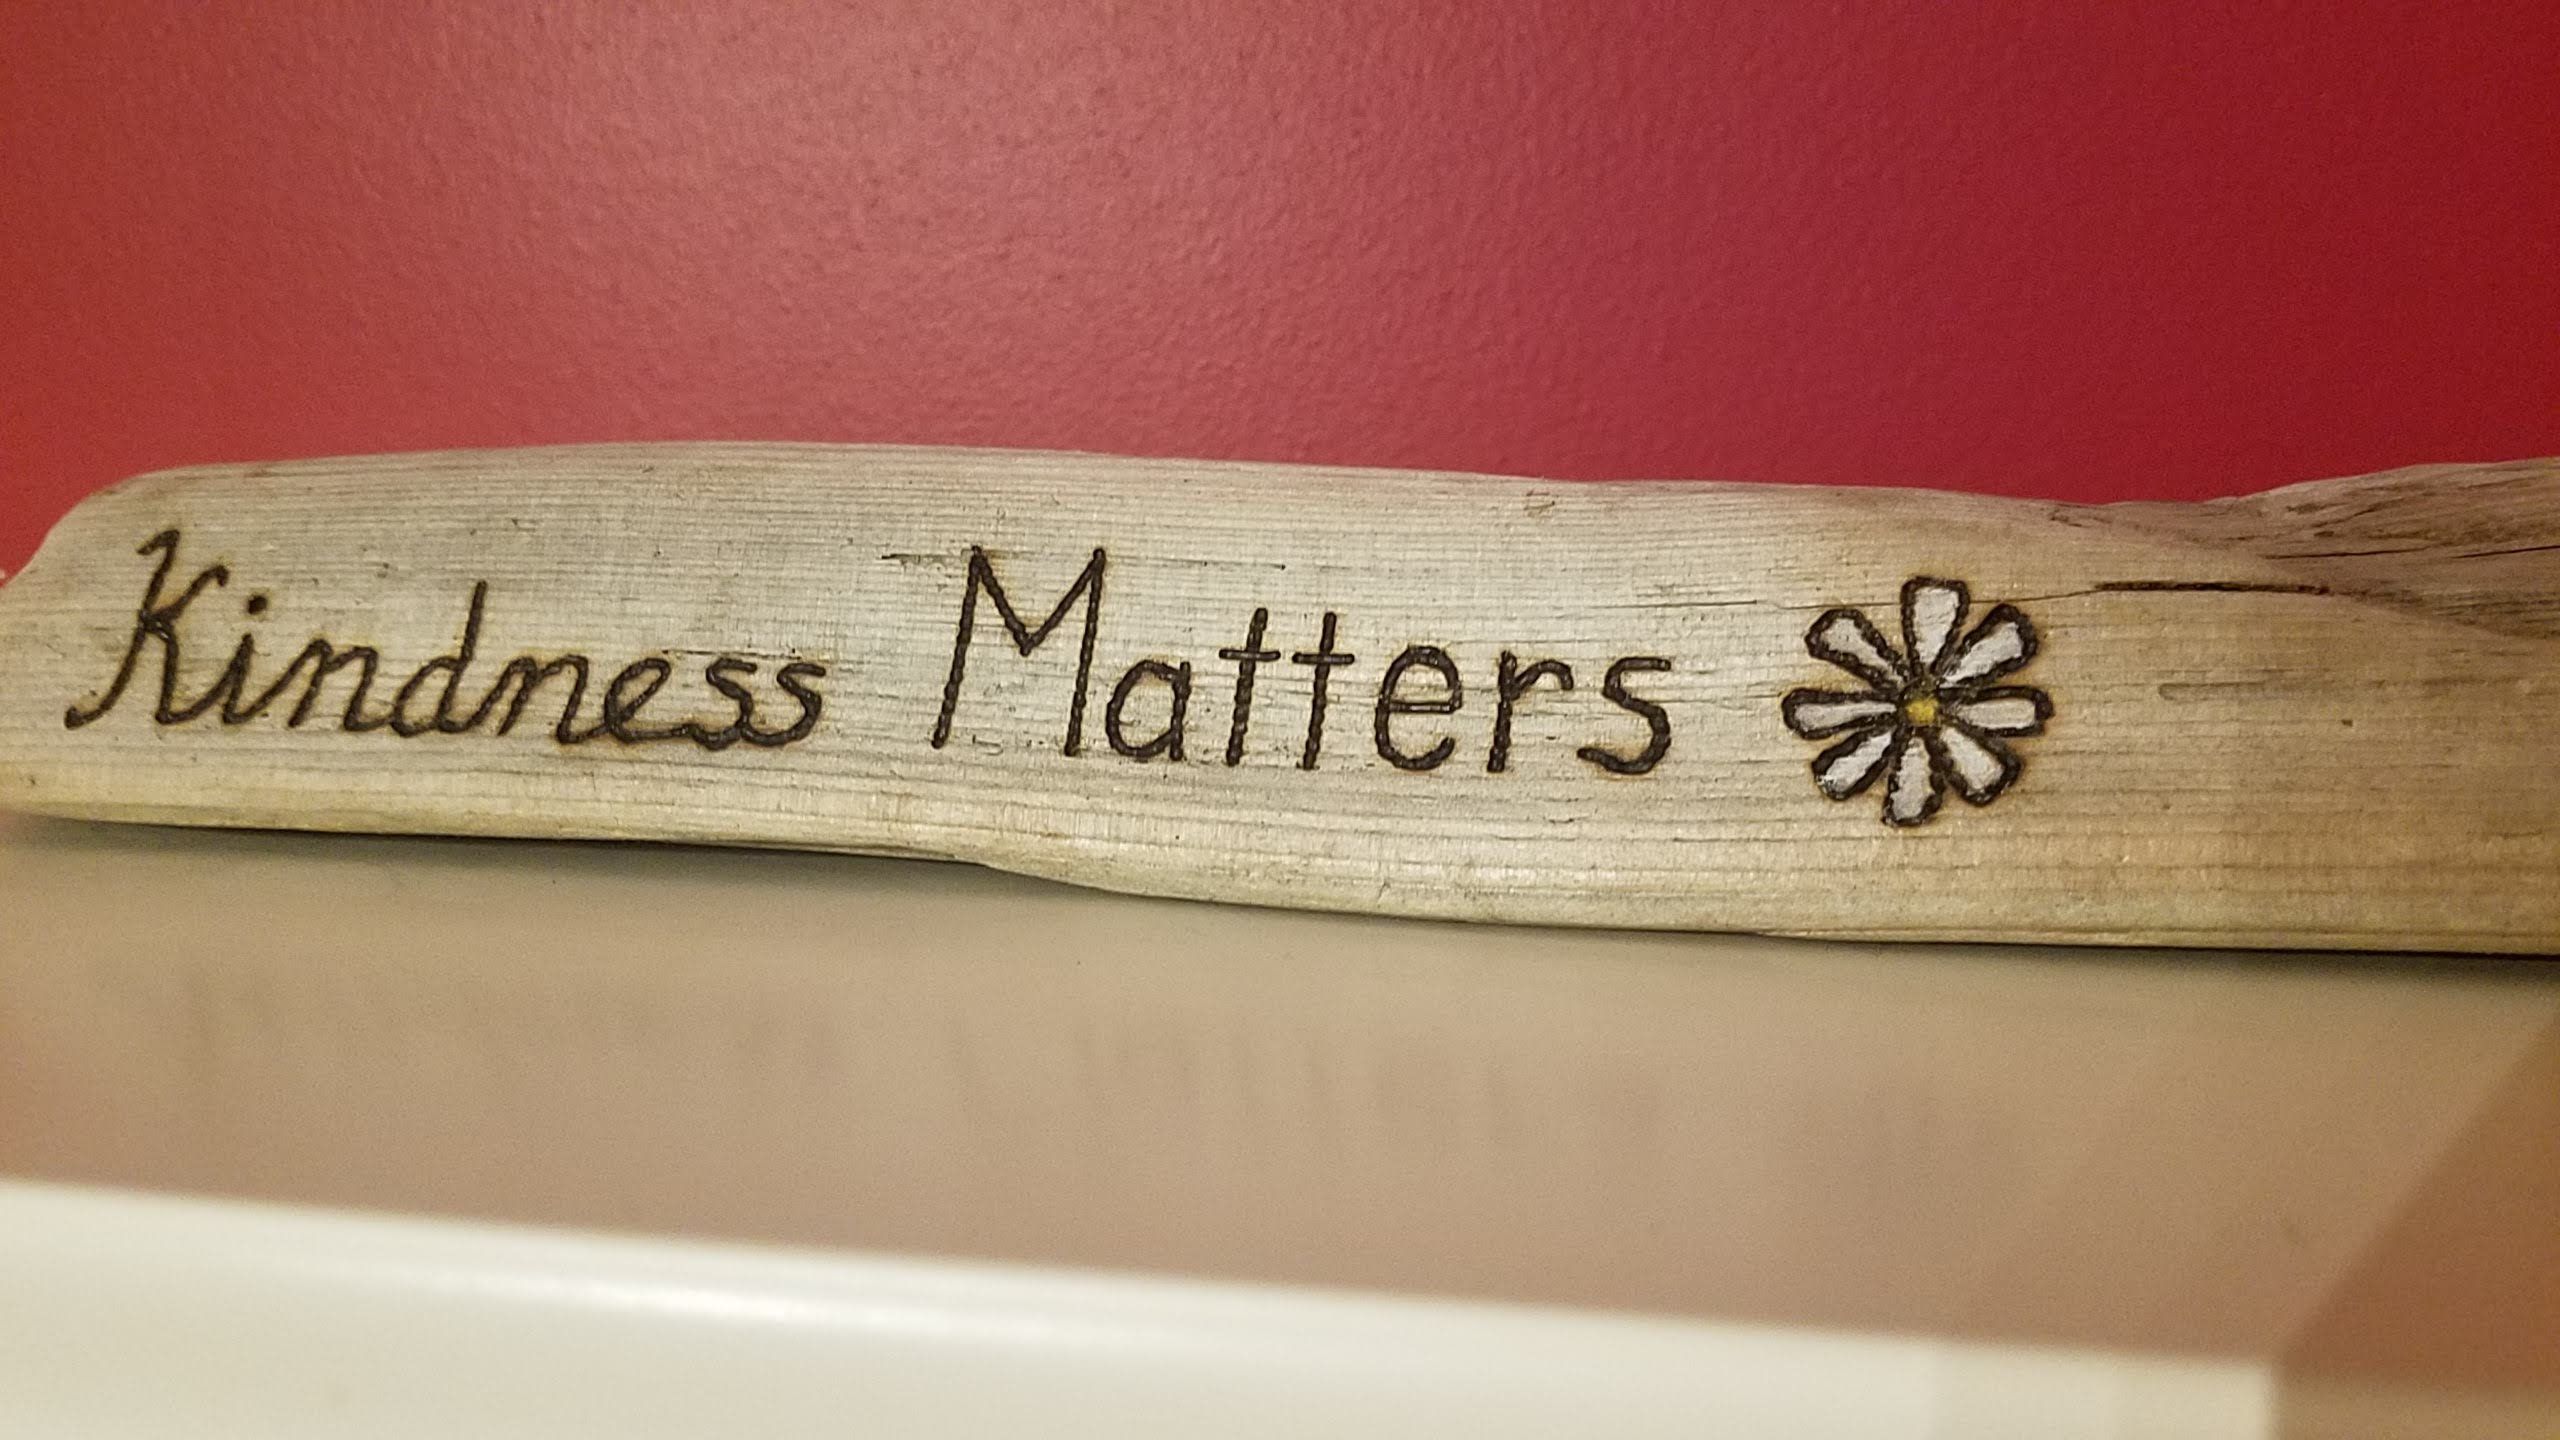 Kindness Matters Wood Burned On Pacific Nw Foraged Driftwood For Regarding 2017 Northwest Wall Art (View 11 of 20)